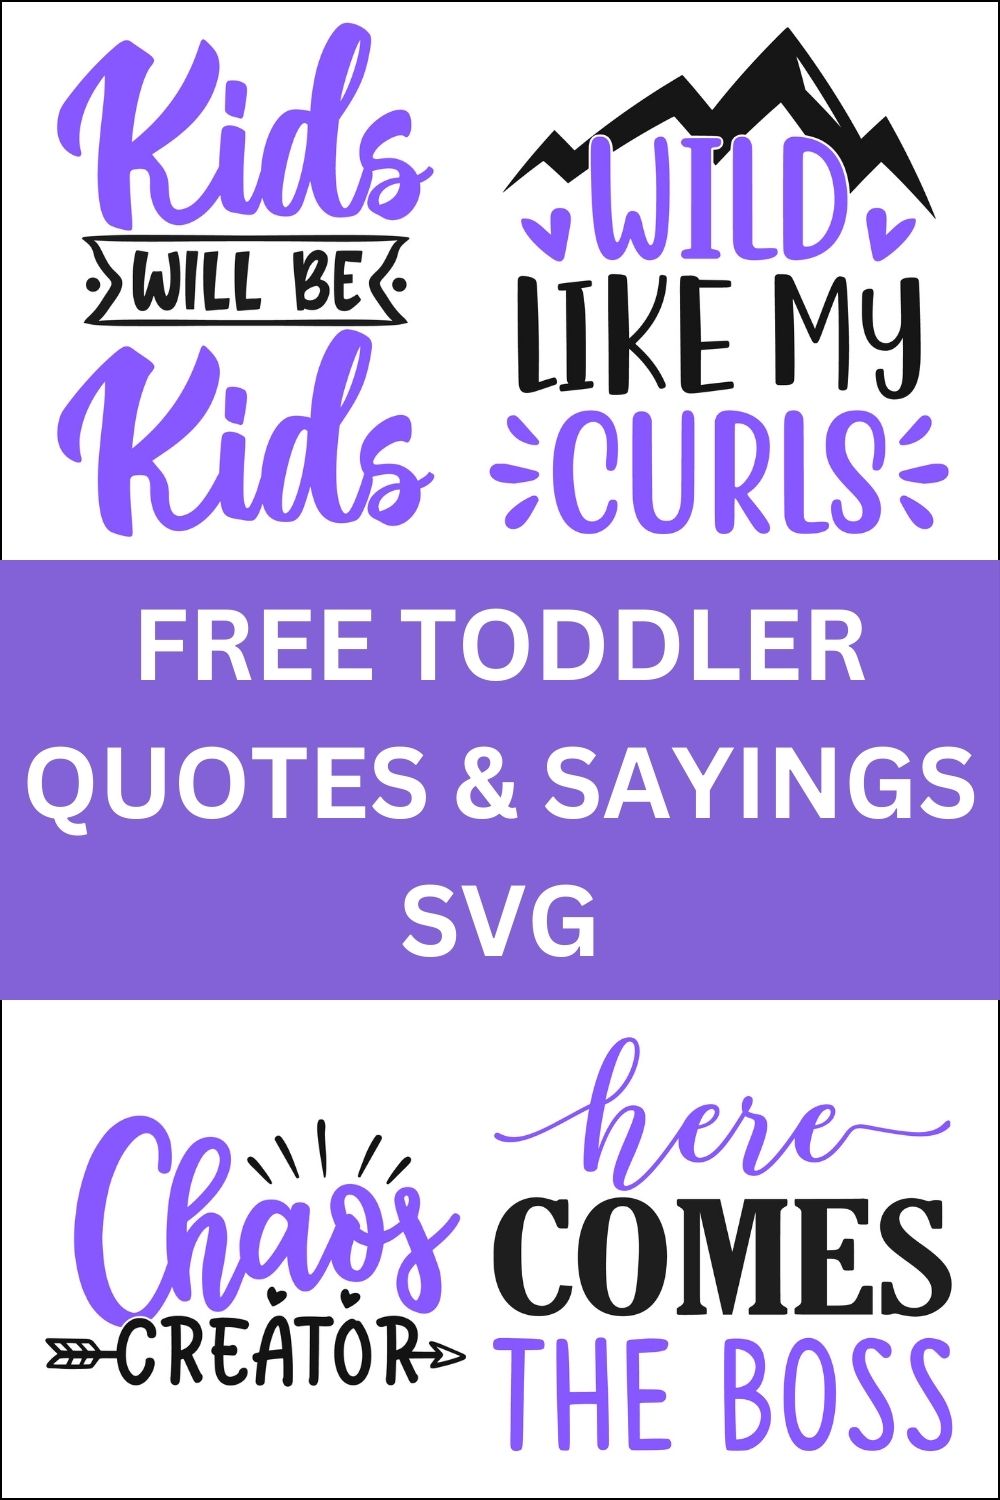 Toddler Quotes & Sayings, toddler, kids sayings, quotes, cricut, download, svg, clipart, designs, baby, free, funny, cool kids